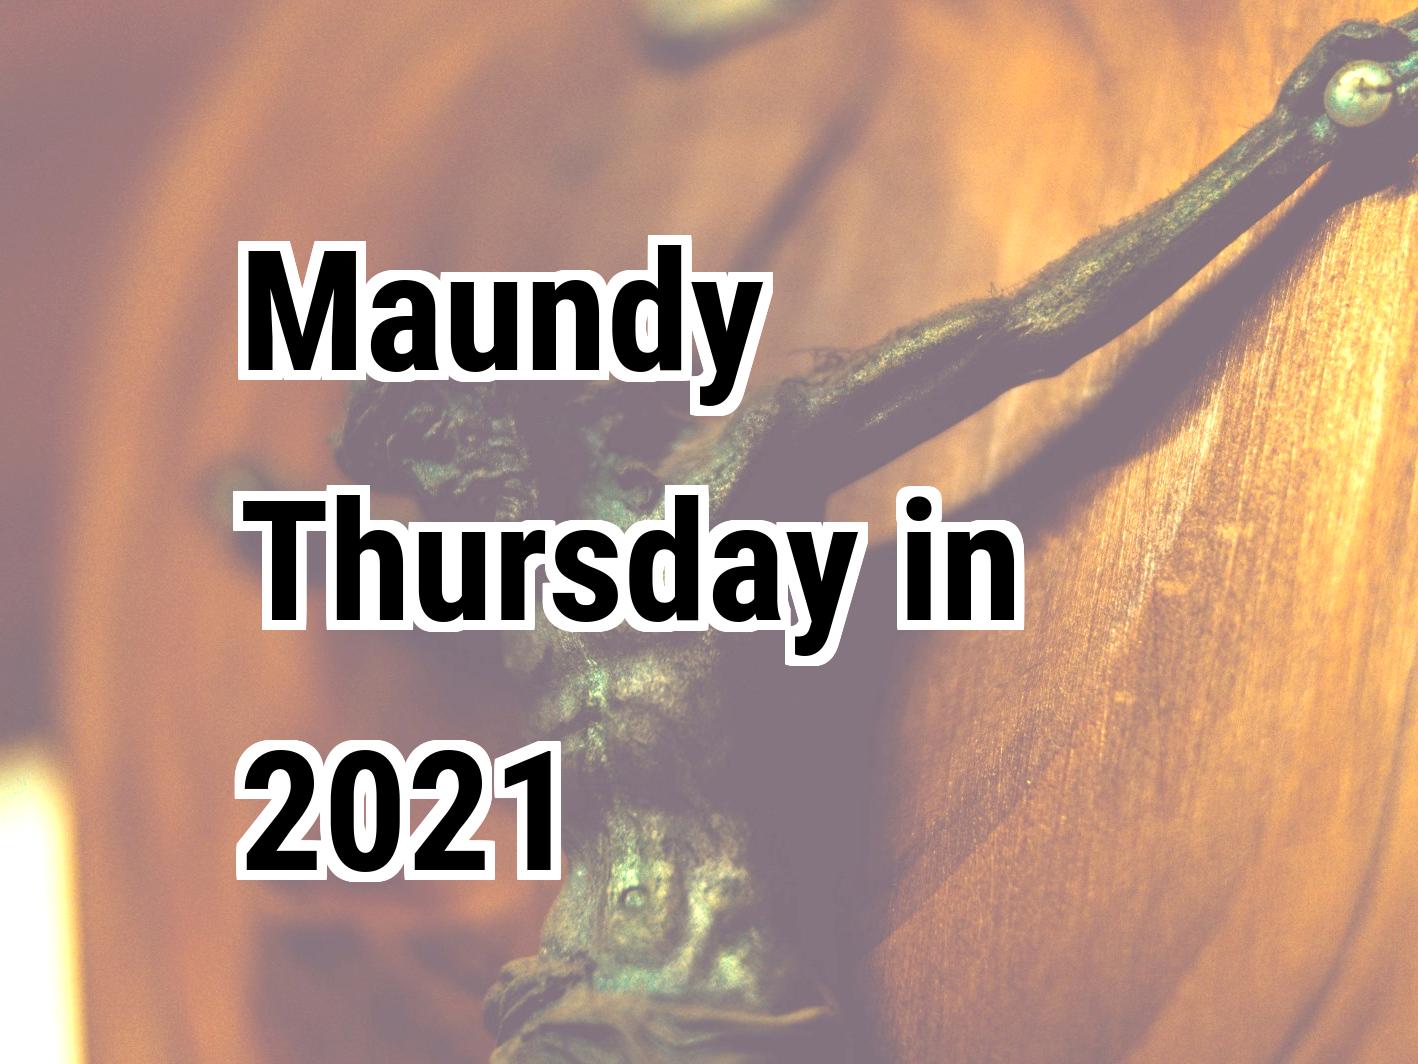 Maundy Thursday 2021. When is Maundy Thursday in 2021